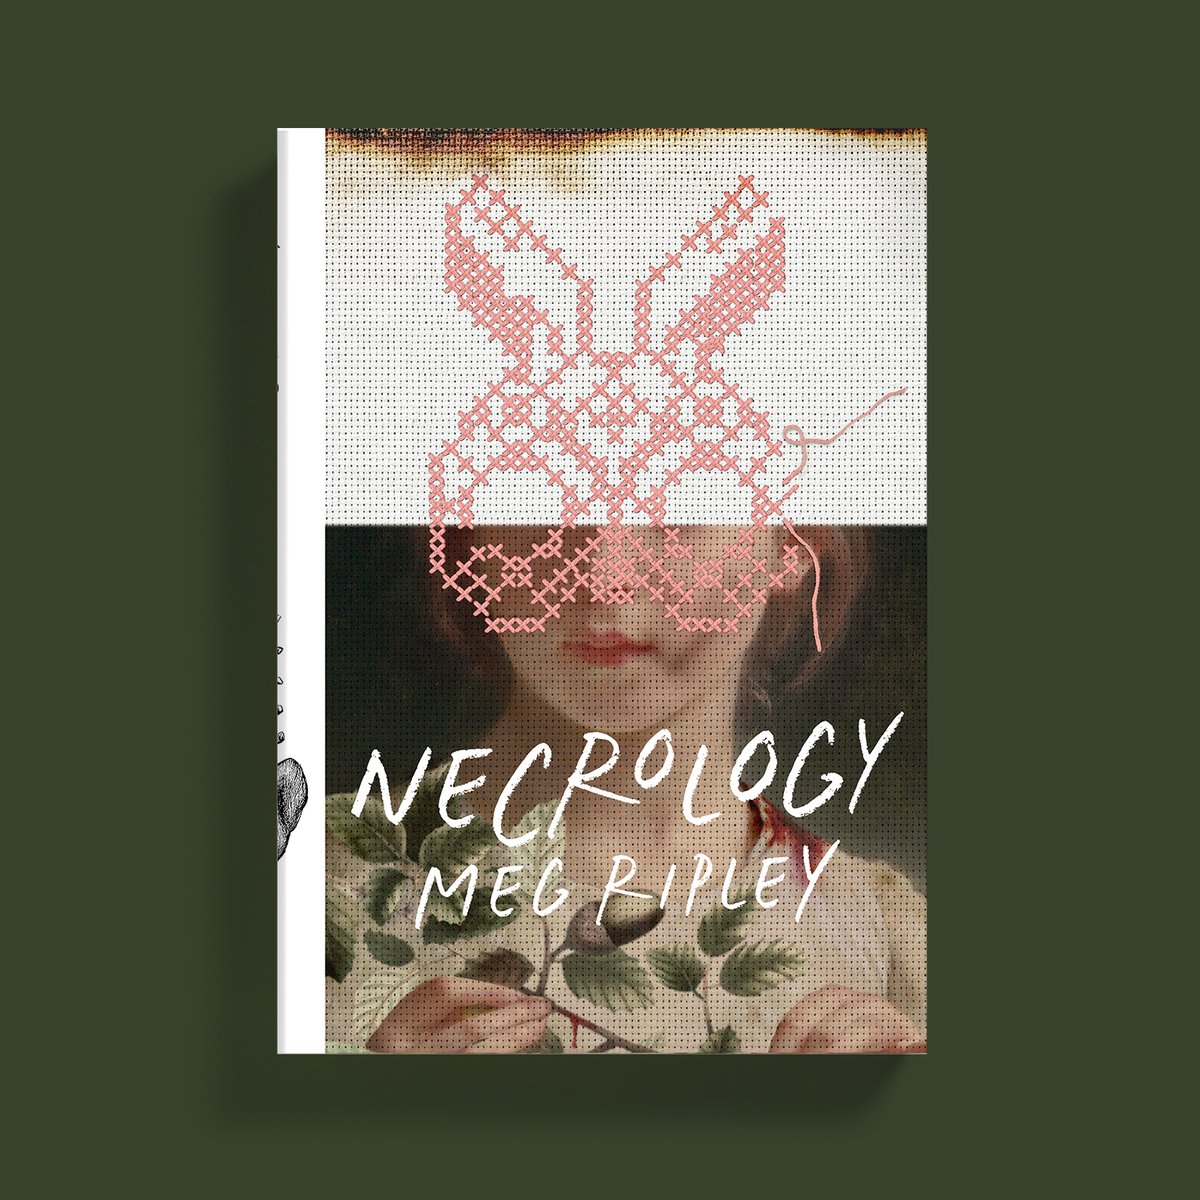 First glimpse of the cover for NECROLOGY by @ripley_meg ! Many thanks to Luisa Dias for her incredible cover work, and to Meg for this feminist folk horror! This is a phenomenal book♥️ 9.24.2024 THERE WILL BE MUD PREORDER creaturehorror.com/books/necrology ARCS press@creaturehorror.com